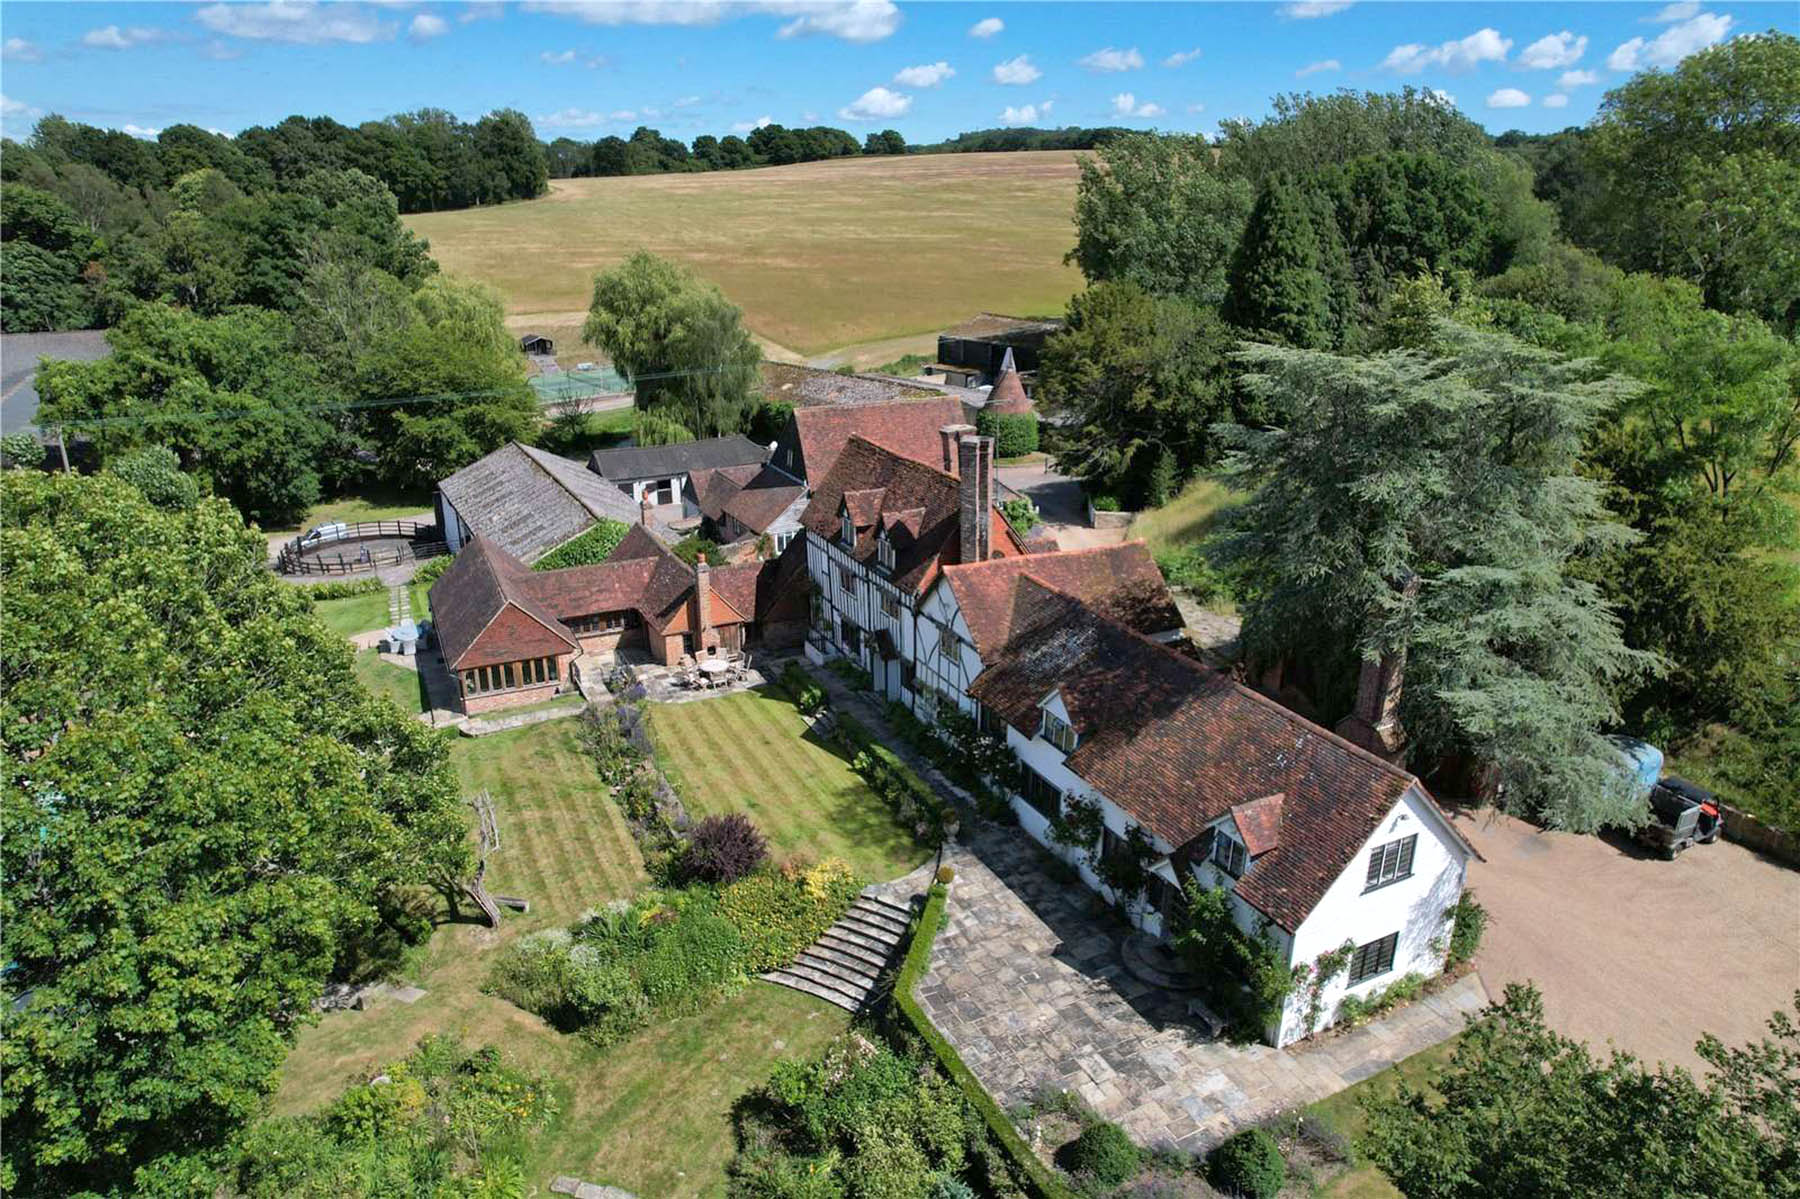 Five Sumptuous Houses For Sale, As Seen In Country Life